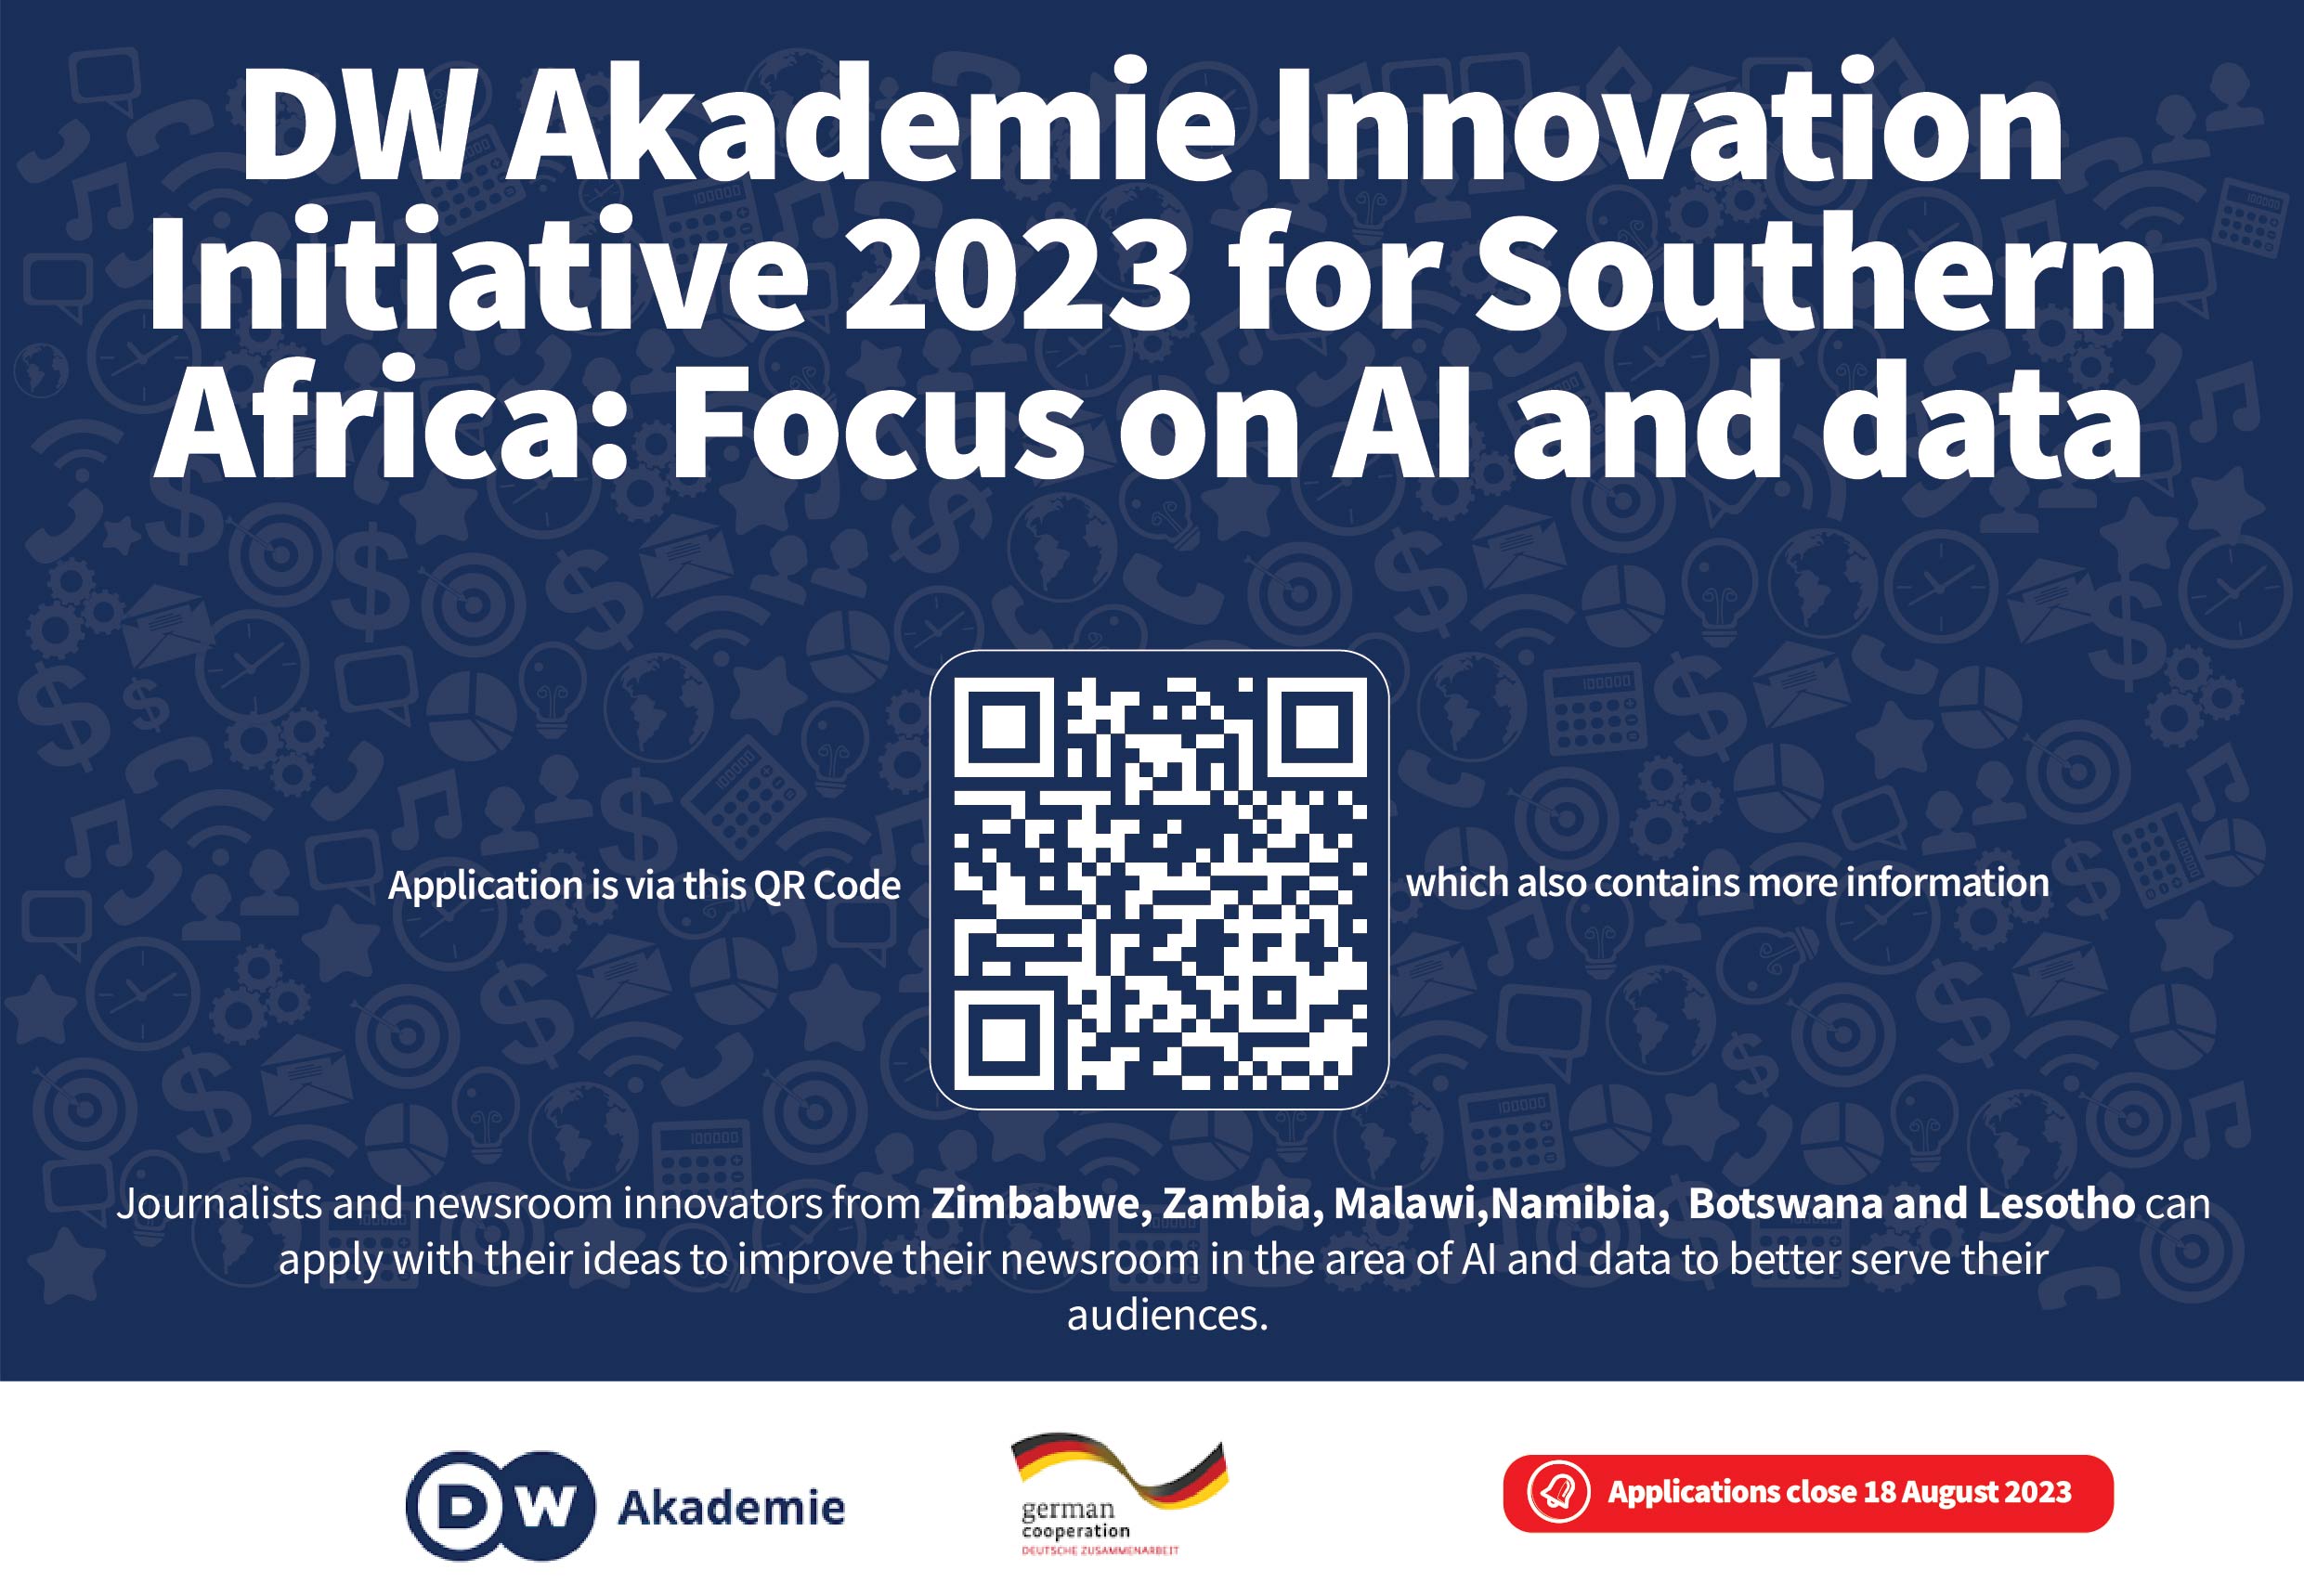 DW Akademie Innovation Initiative 2023 for Southern Africa: Focus on AI and data